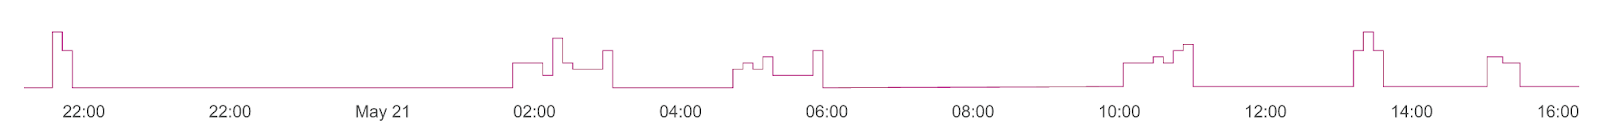 5 MI Internet Outages showing the timeline view.png